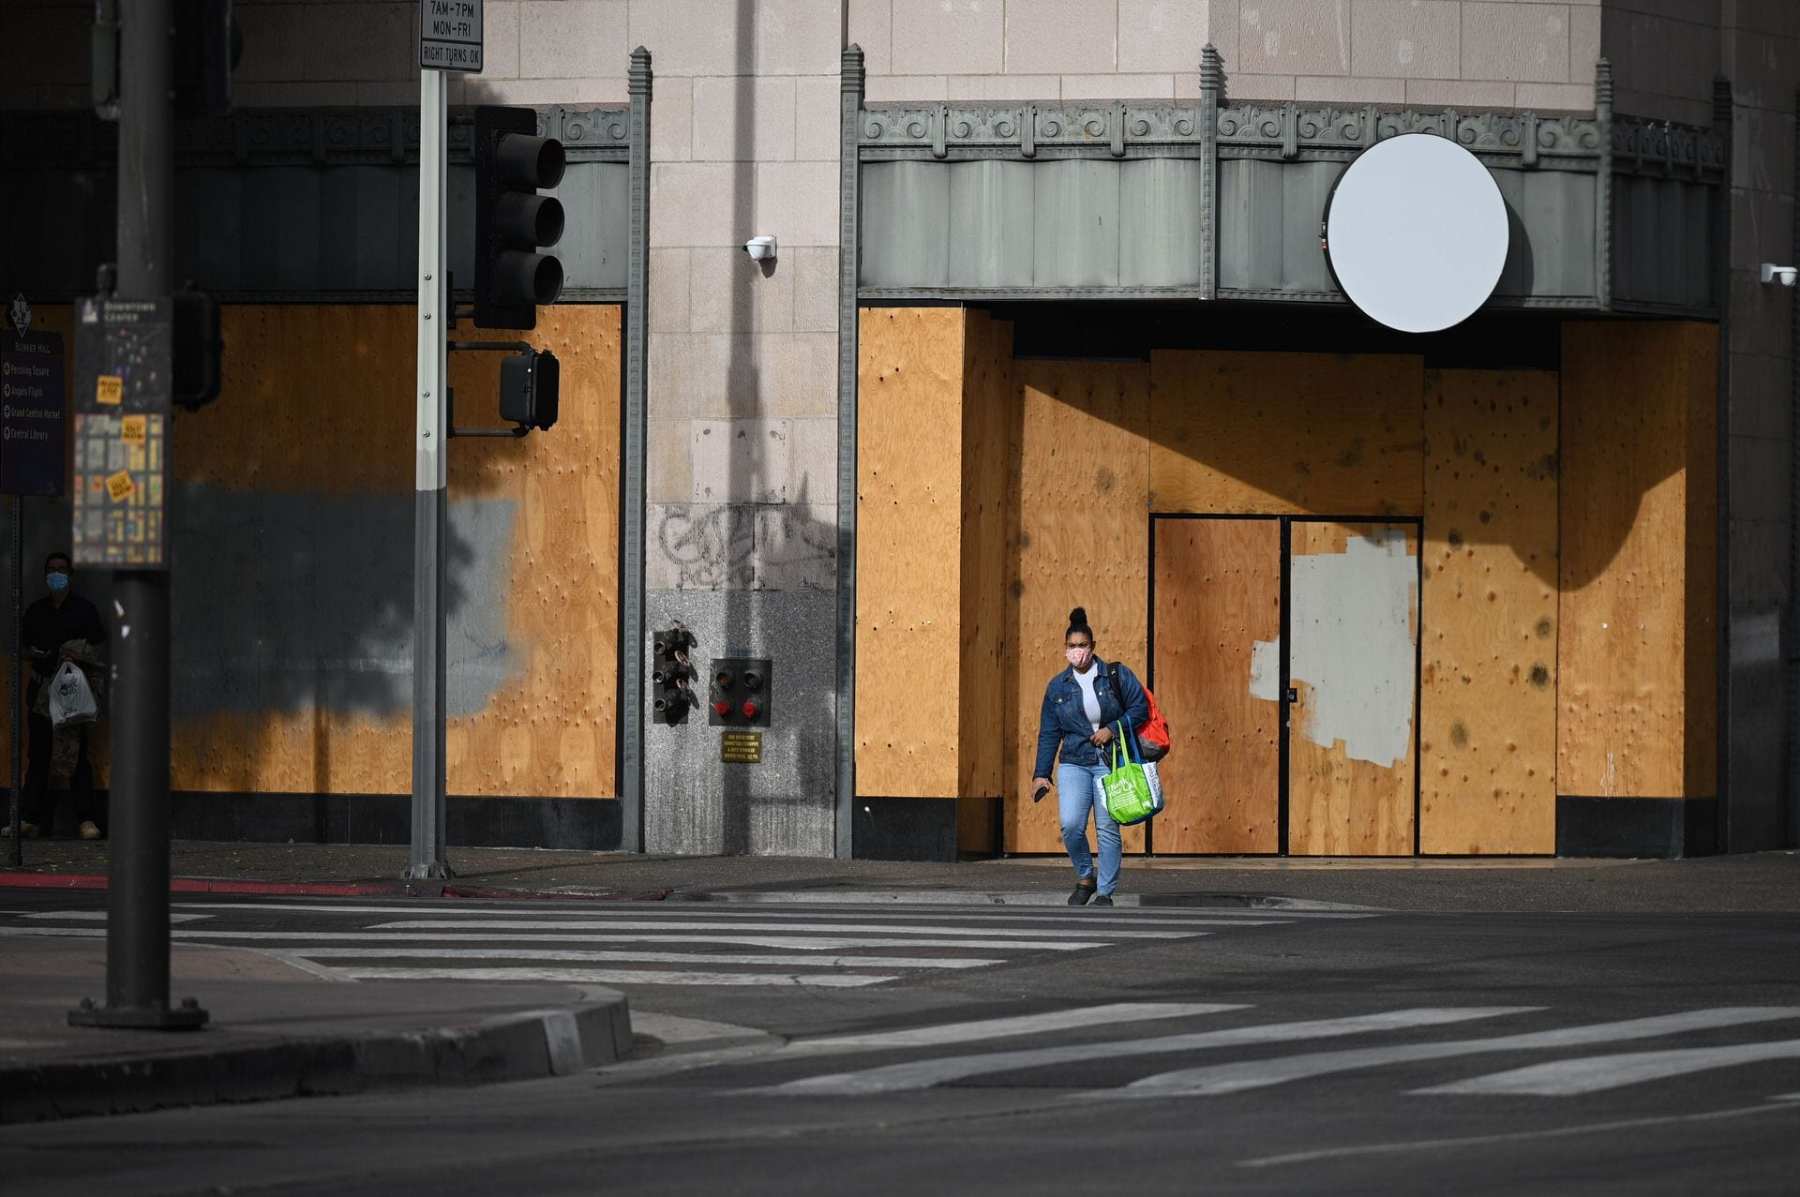 A woman wearing a facemask to prevent the spread of coronavirus walks past a boarded up storefront at the intersection of Hill Street and 5th Street in downtown Los Angeles, California, November 5, 2020 as the country awaits the result of the November 3 US presidential election. - Businesses in major US cities were boarded up in anticipation of unrest. The nail-biting US election was on the cusp of finally producing a winner Thursday, with Democrat Joe Biden declaring "no doubt" he would beat President Donald Trump and all eyes on the decisive state of Pennsylvania. (Photo by Robyn Beck / AFP)